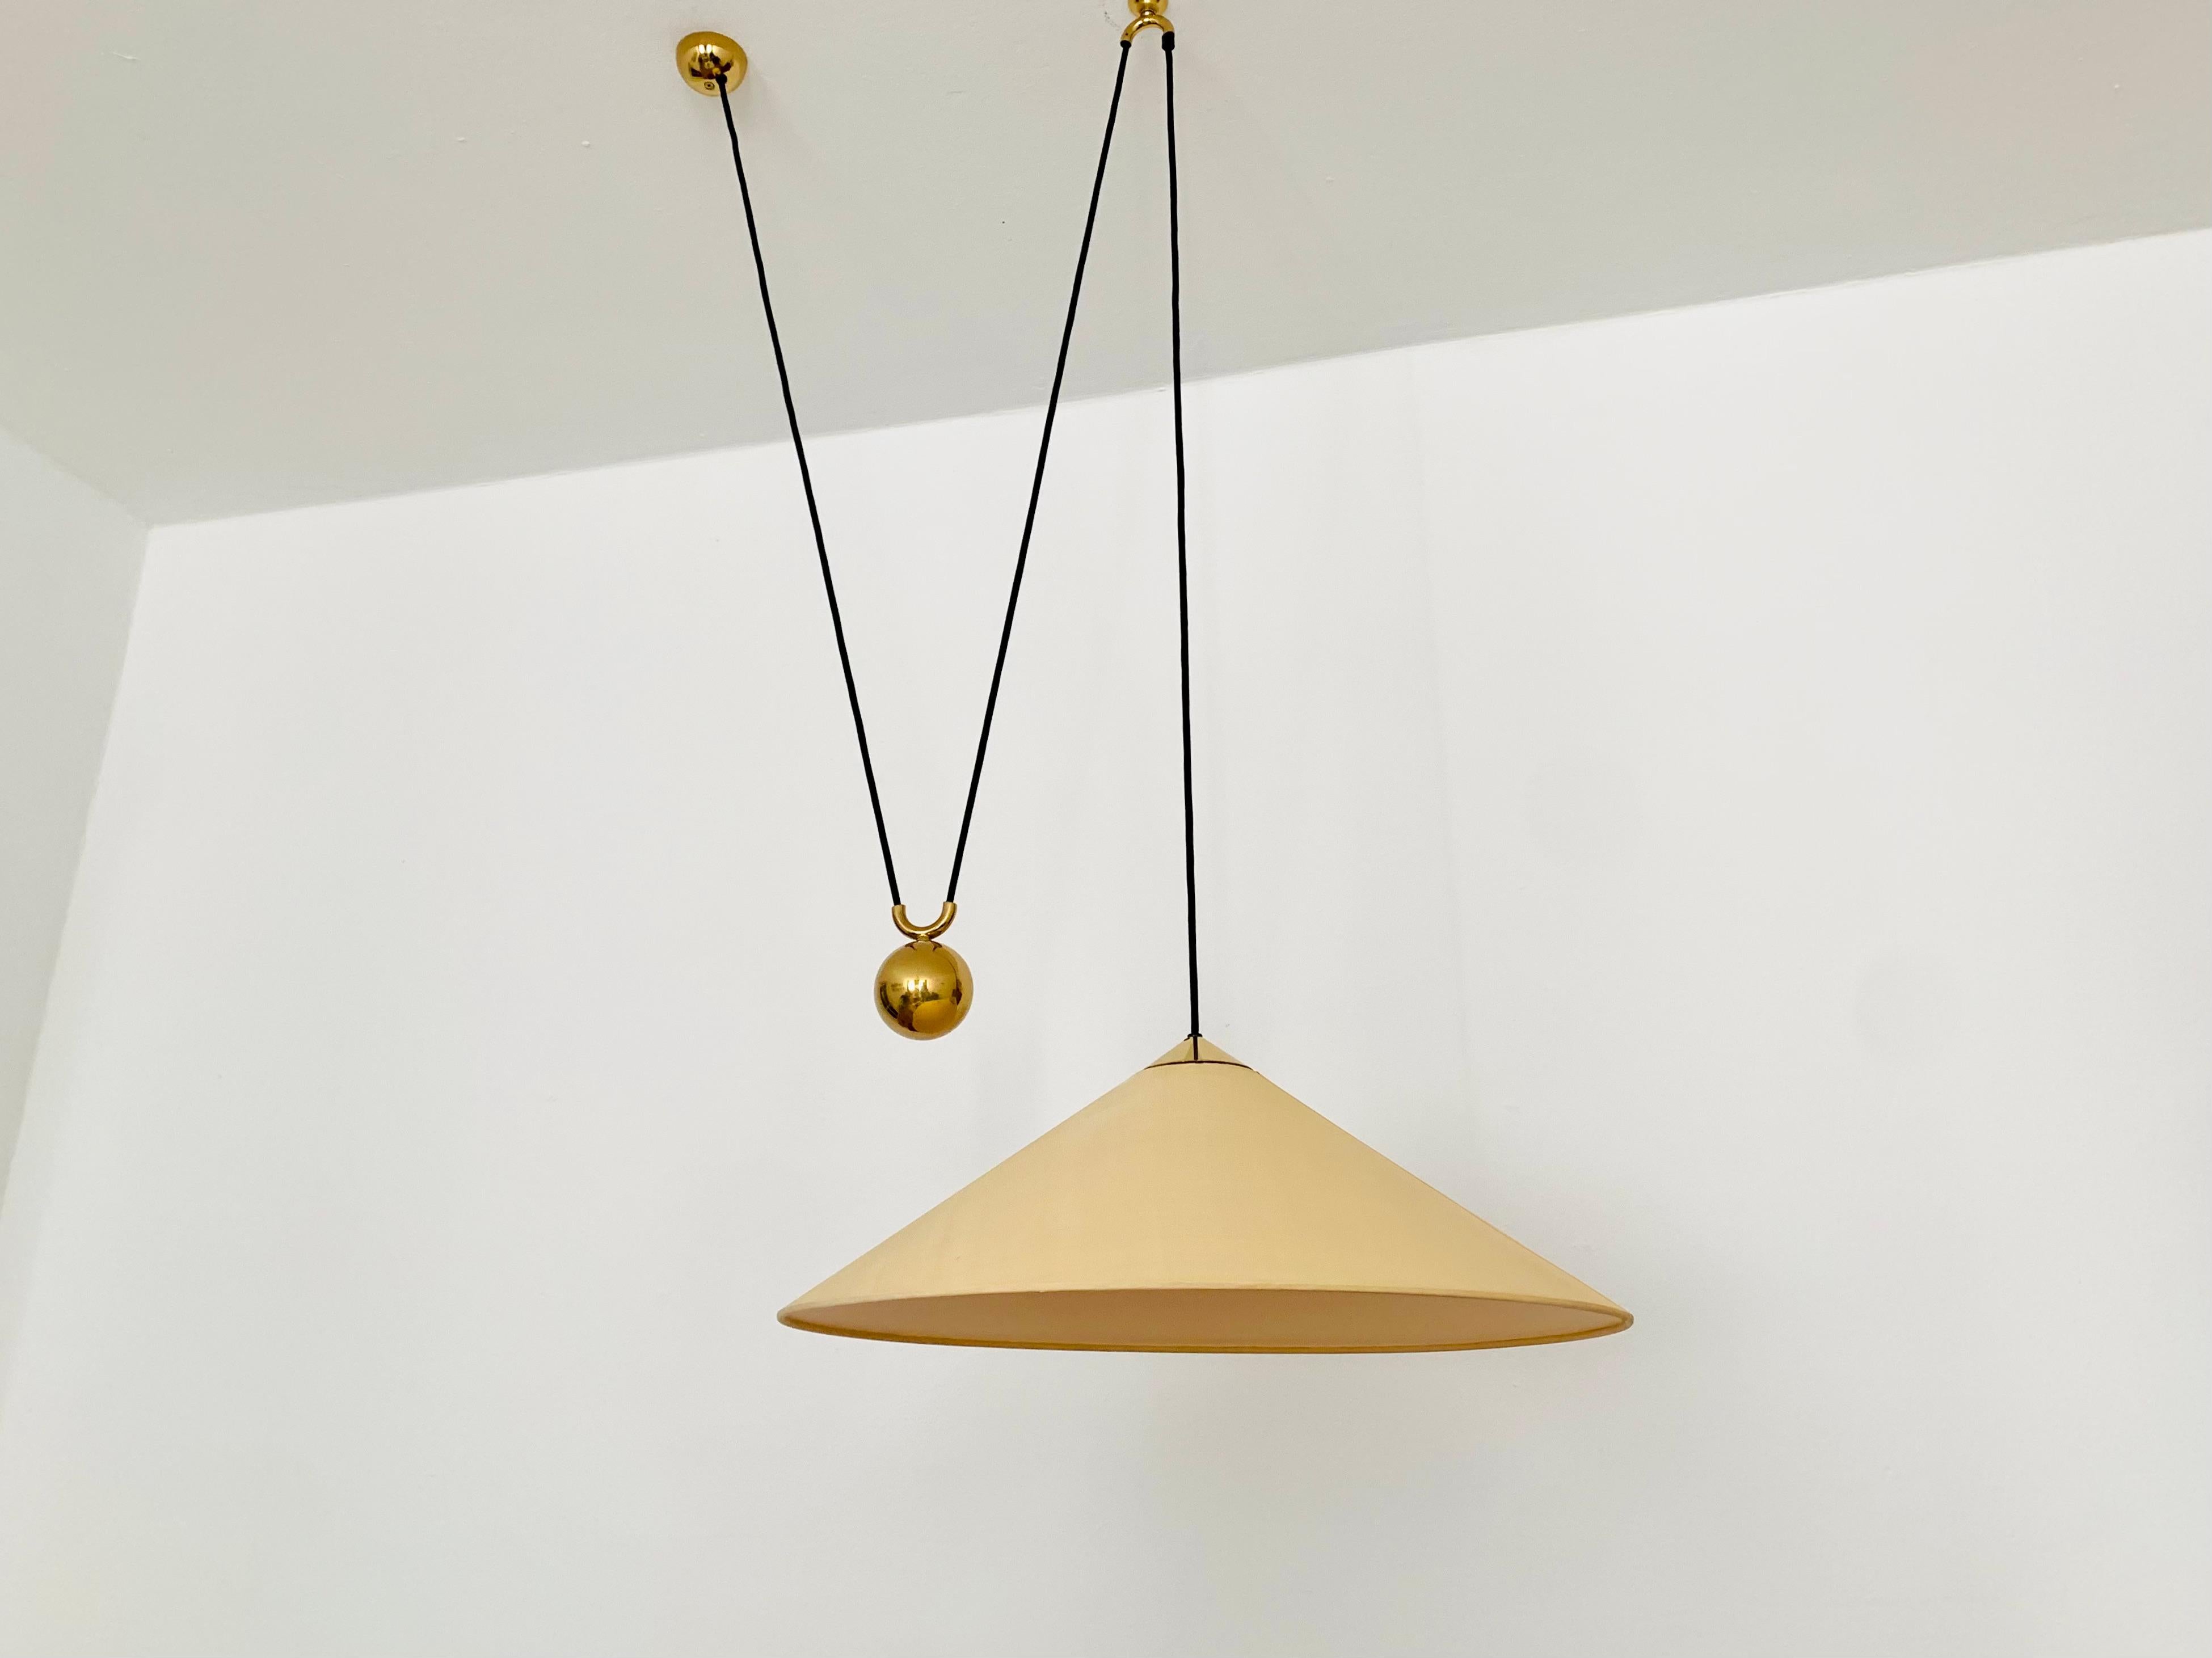 Very nice pendant lamp from the 1960s.
The lighting effect of the lamp is extremely beautiful.
The design and the special lampshade create a very elegant and pleasant light.
The lamp creates a very cozy atmosphere and is very high